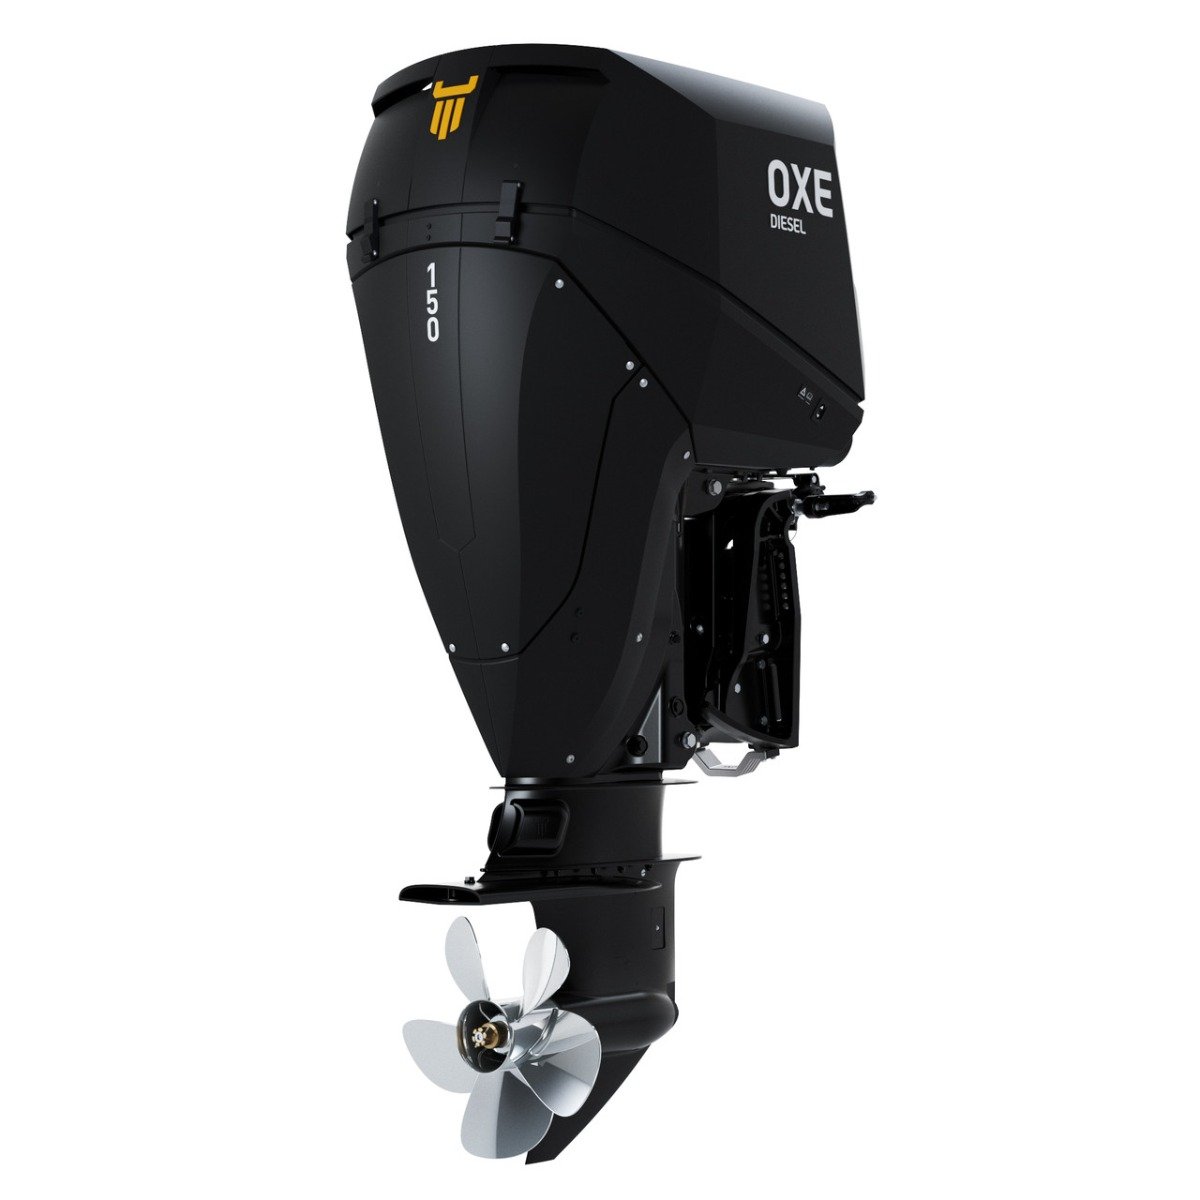 Engine outboard Diesel 150HP OXE33